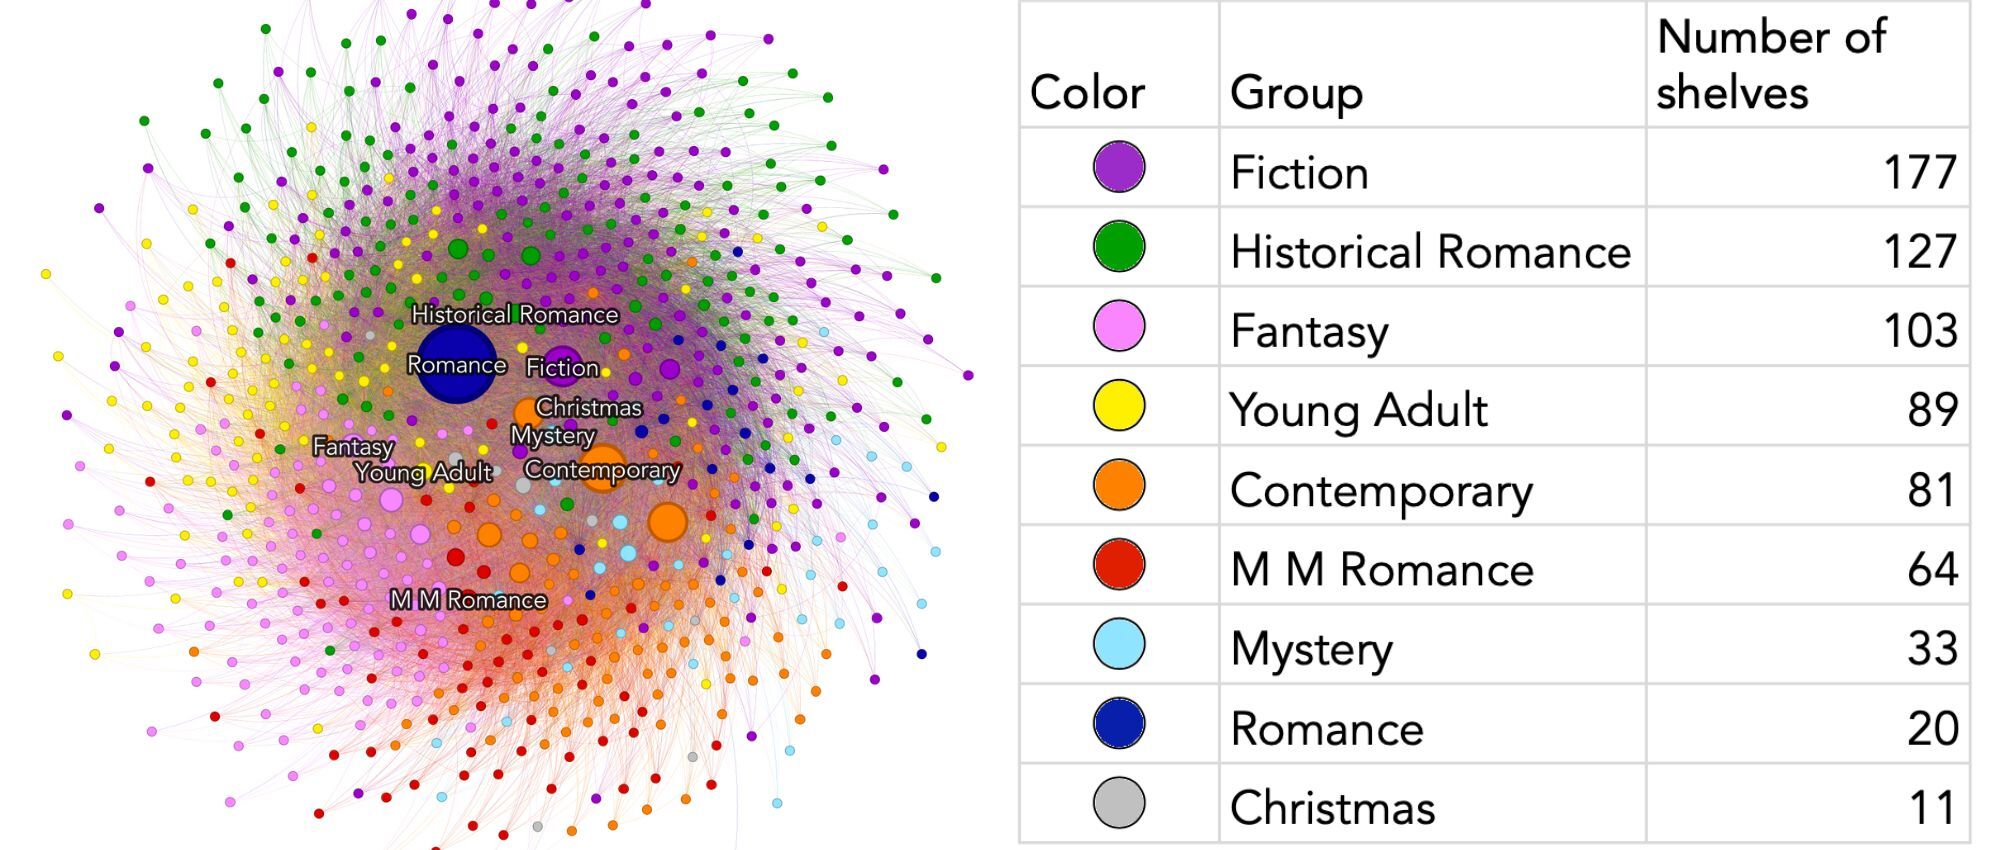 A graphic with colors and dots representing different literary genres